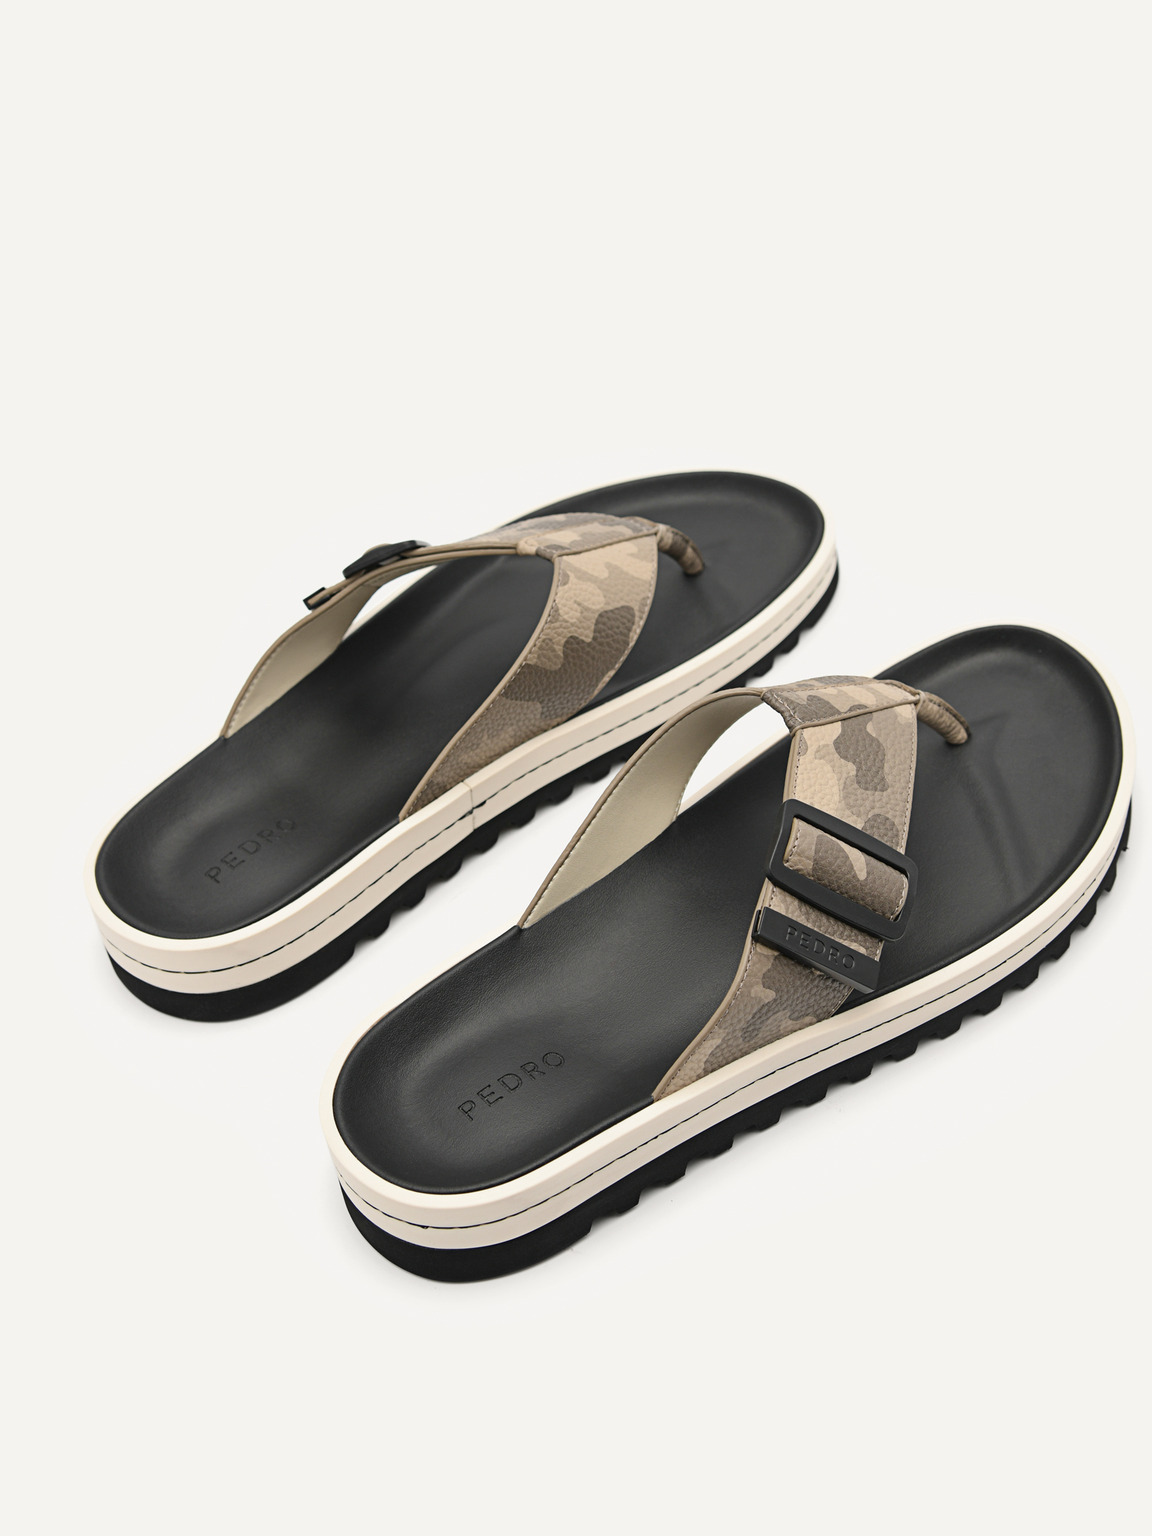 George Thong Sandals, Taupe